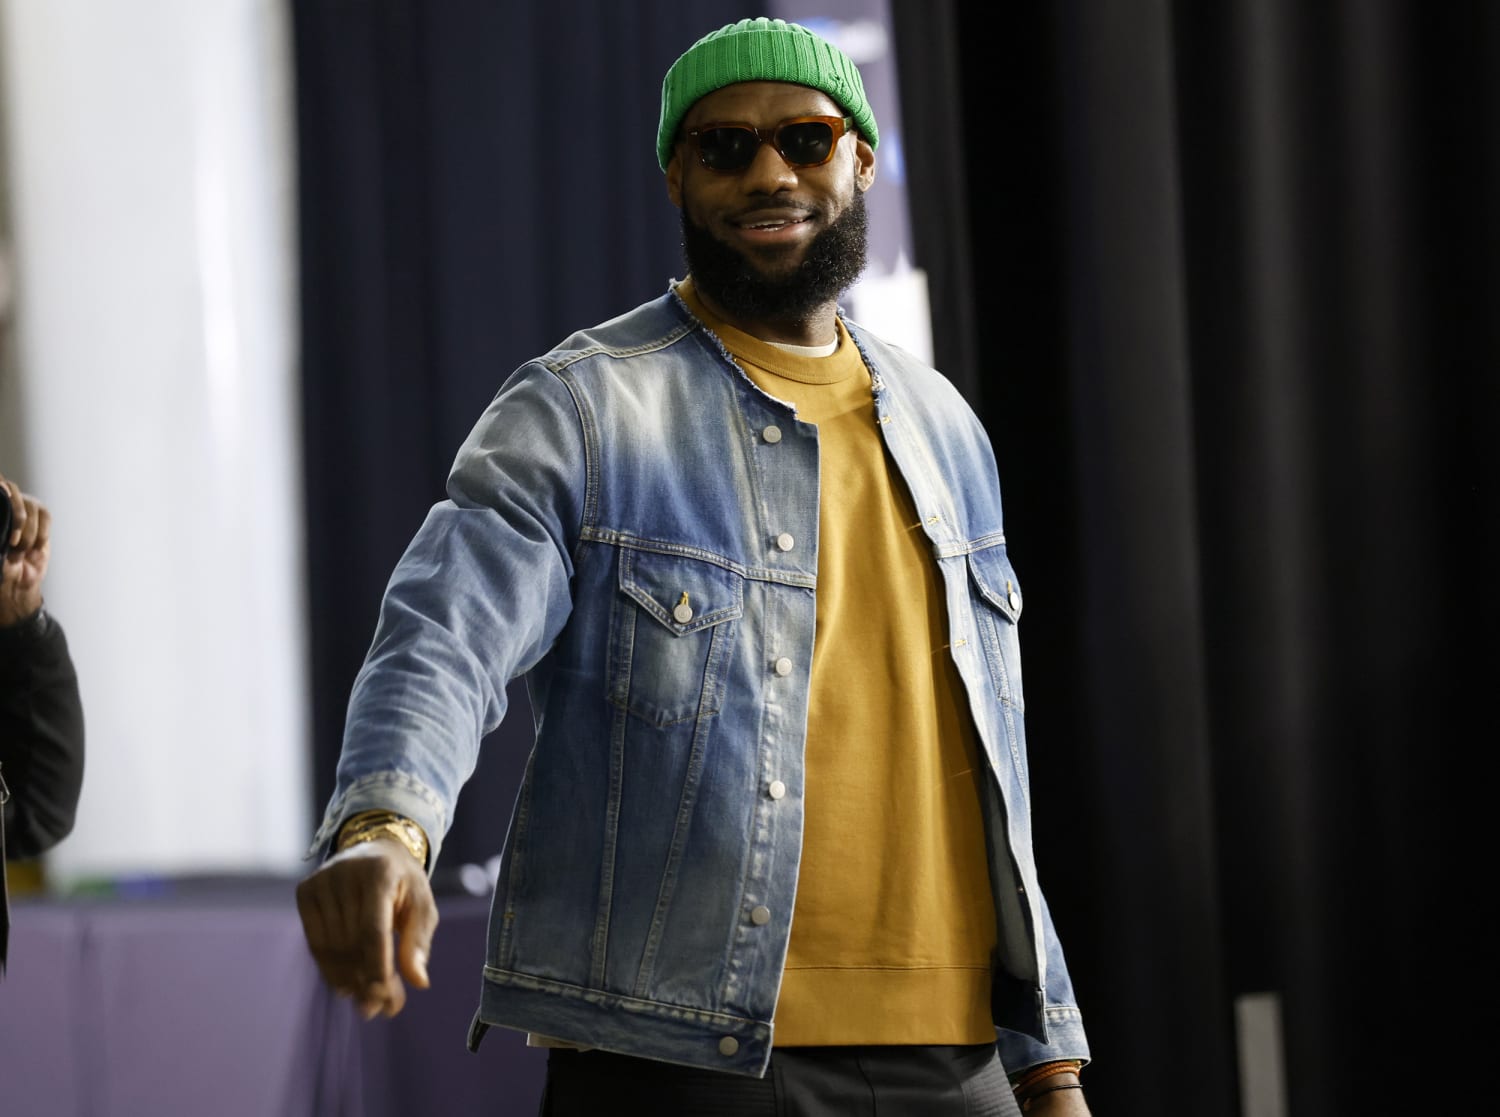 LeBron James is in a New York state of mind